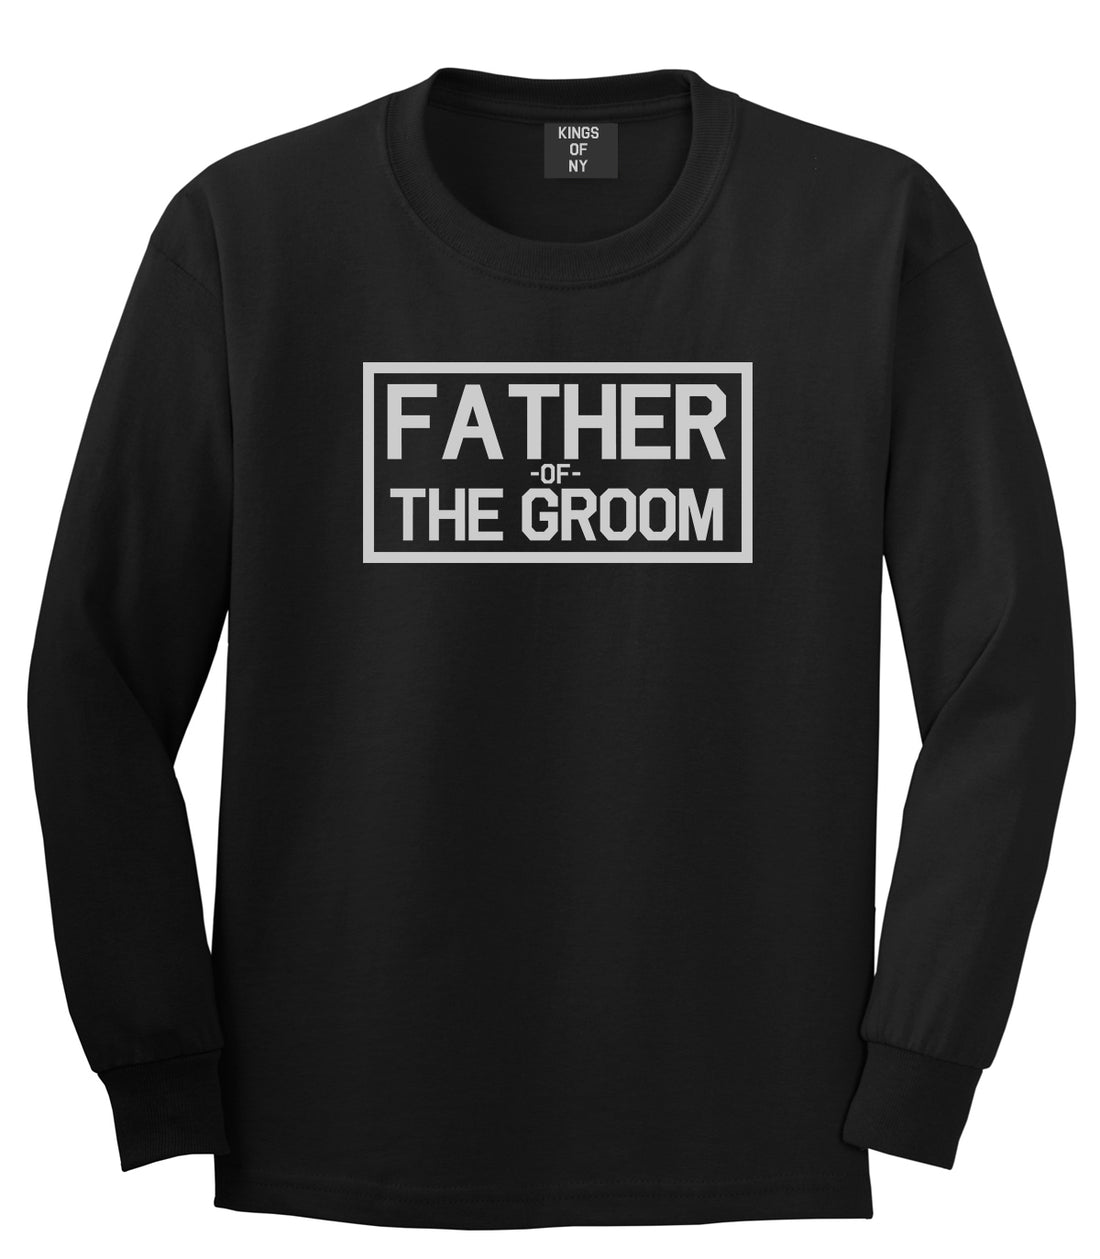 Father Of The Groom Mens Black Long Sleeve T-Shirt by Kings Of NY